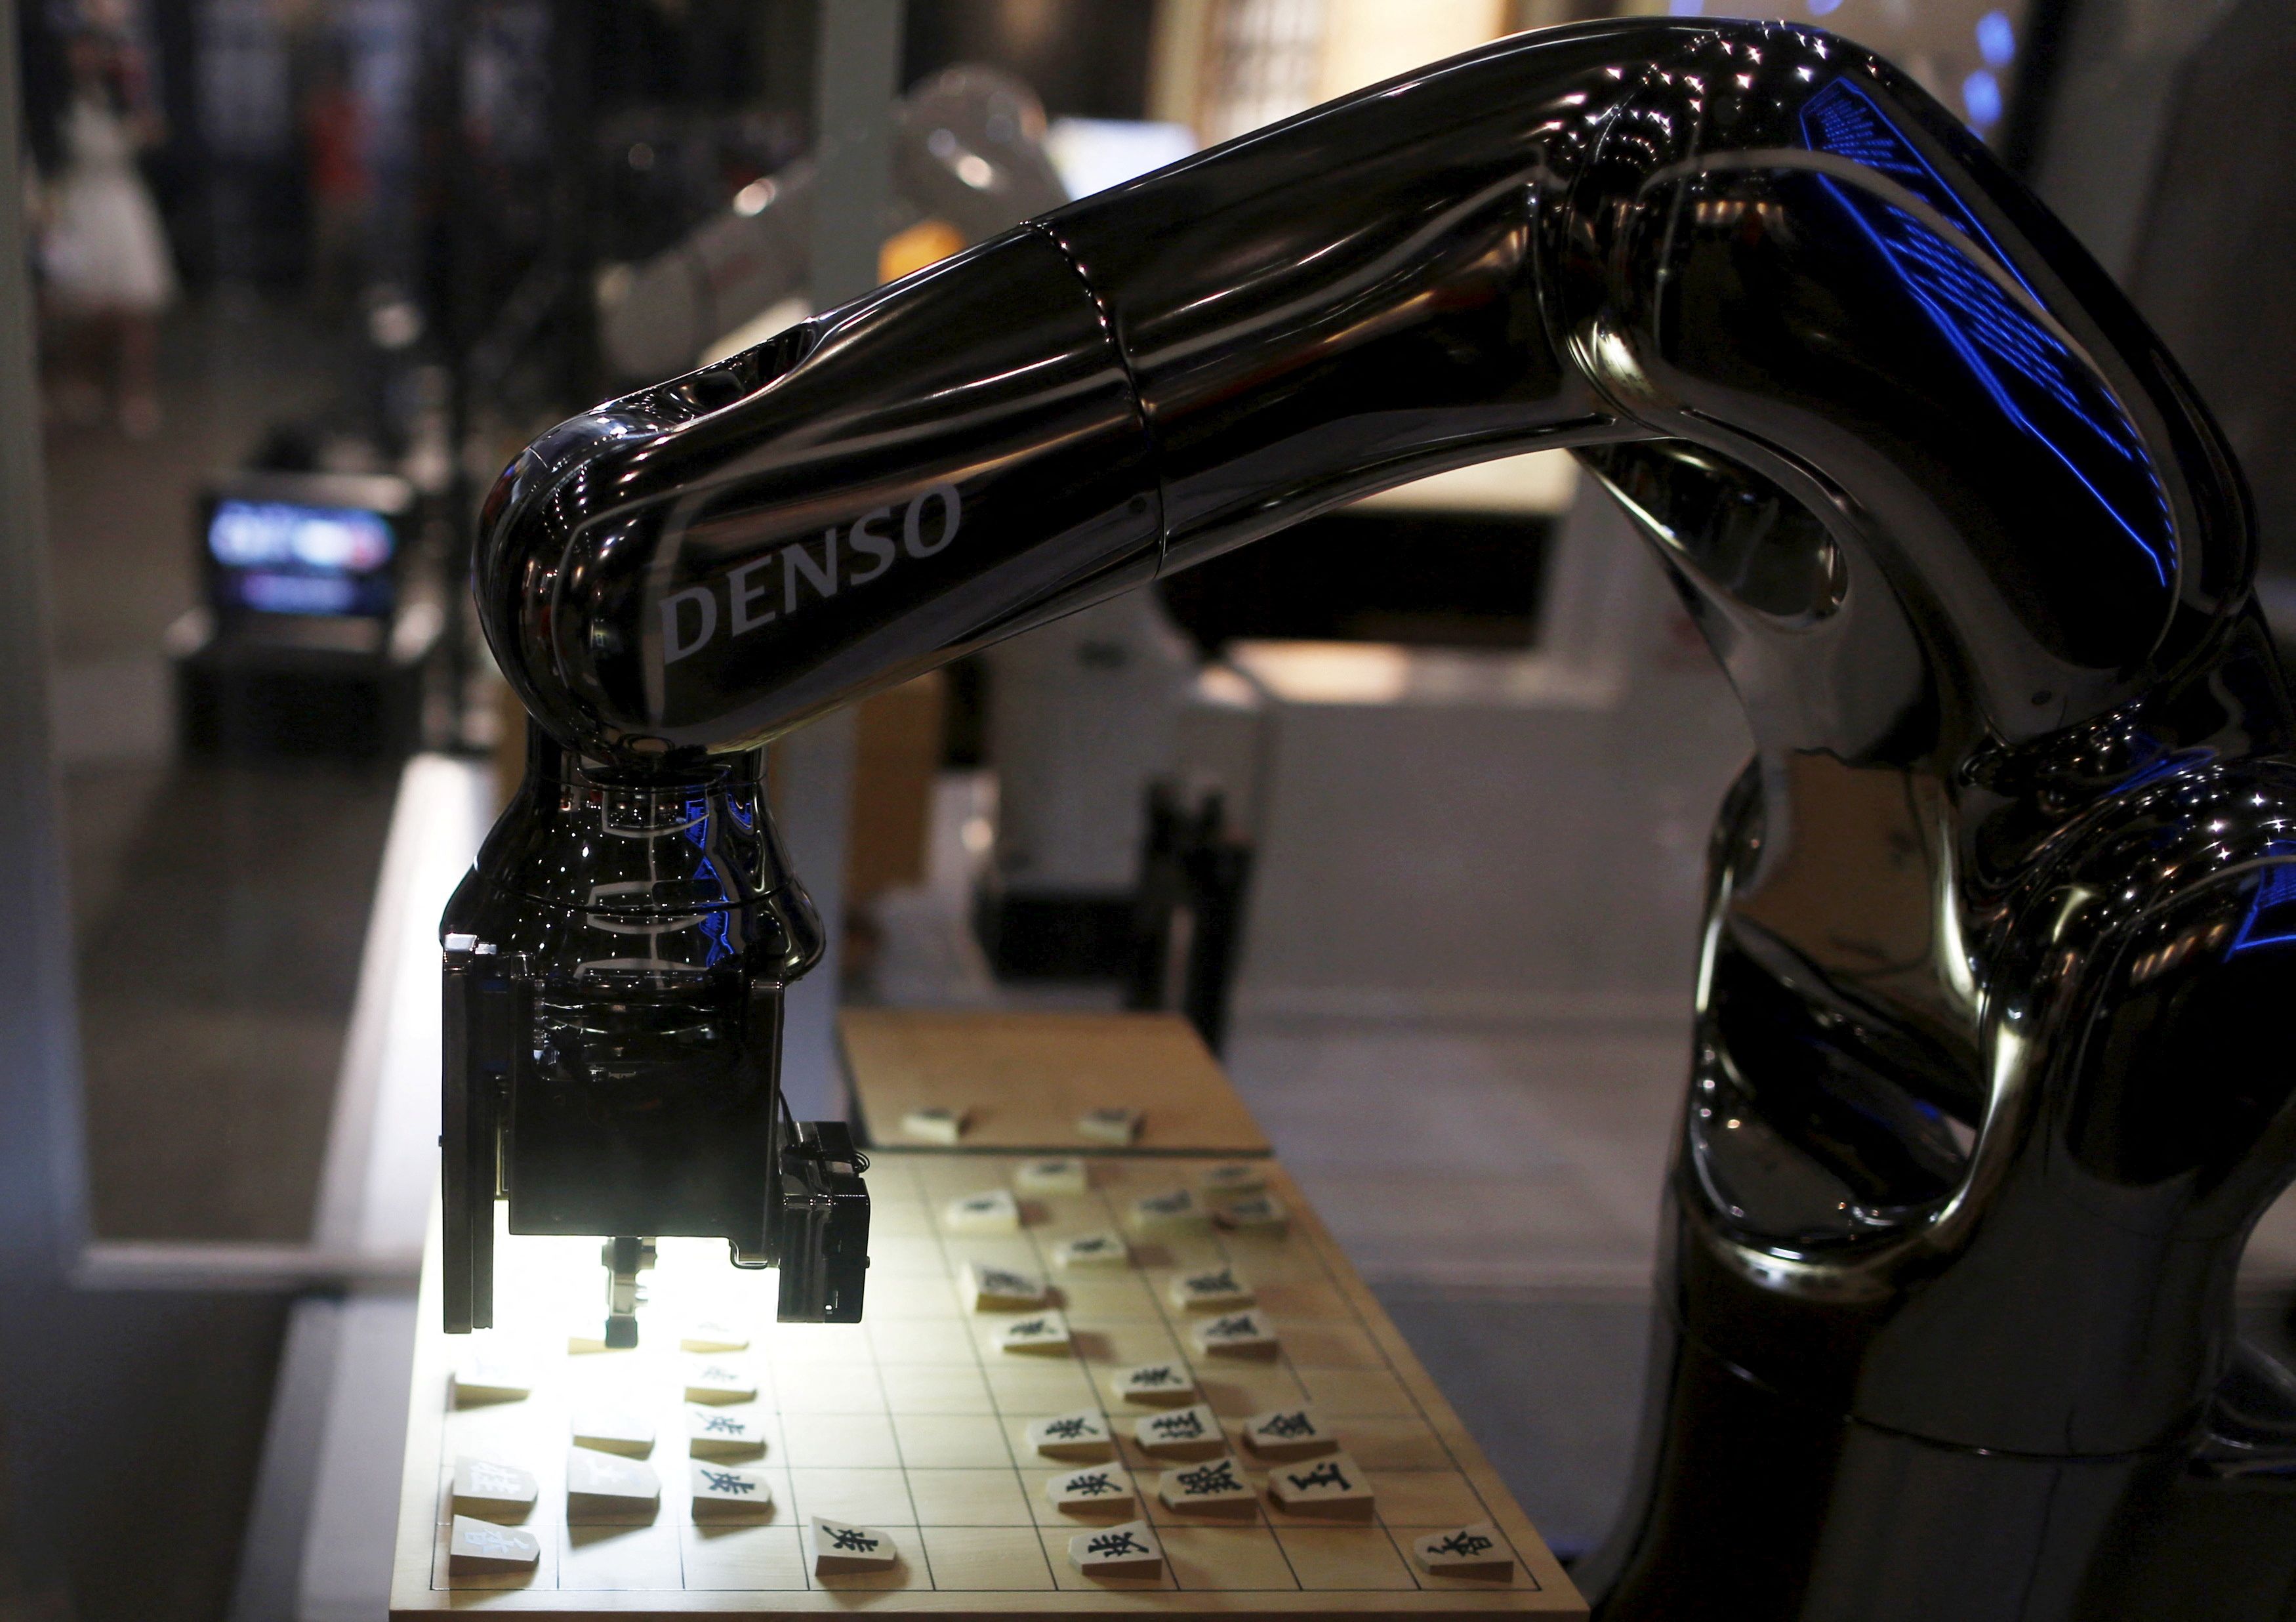 Denso Corp's robot arm "Denoute-san" plays Japanese chess, also known as Shogi, at a booth during Niconico Chokaigi 2015 in Makuhari